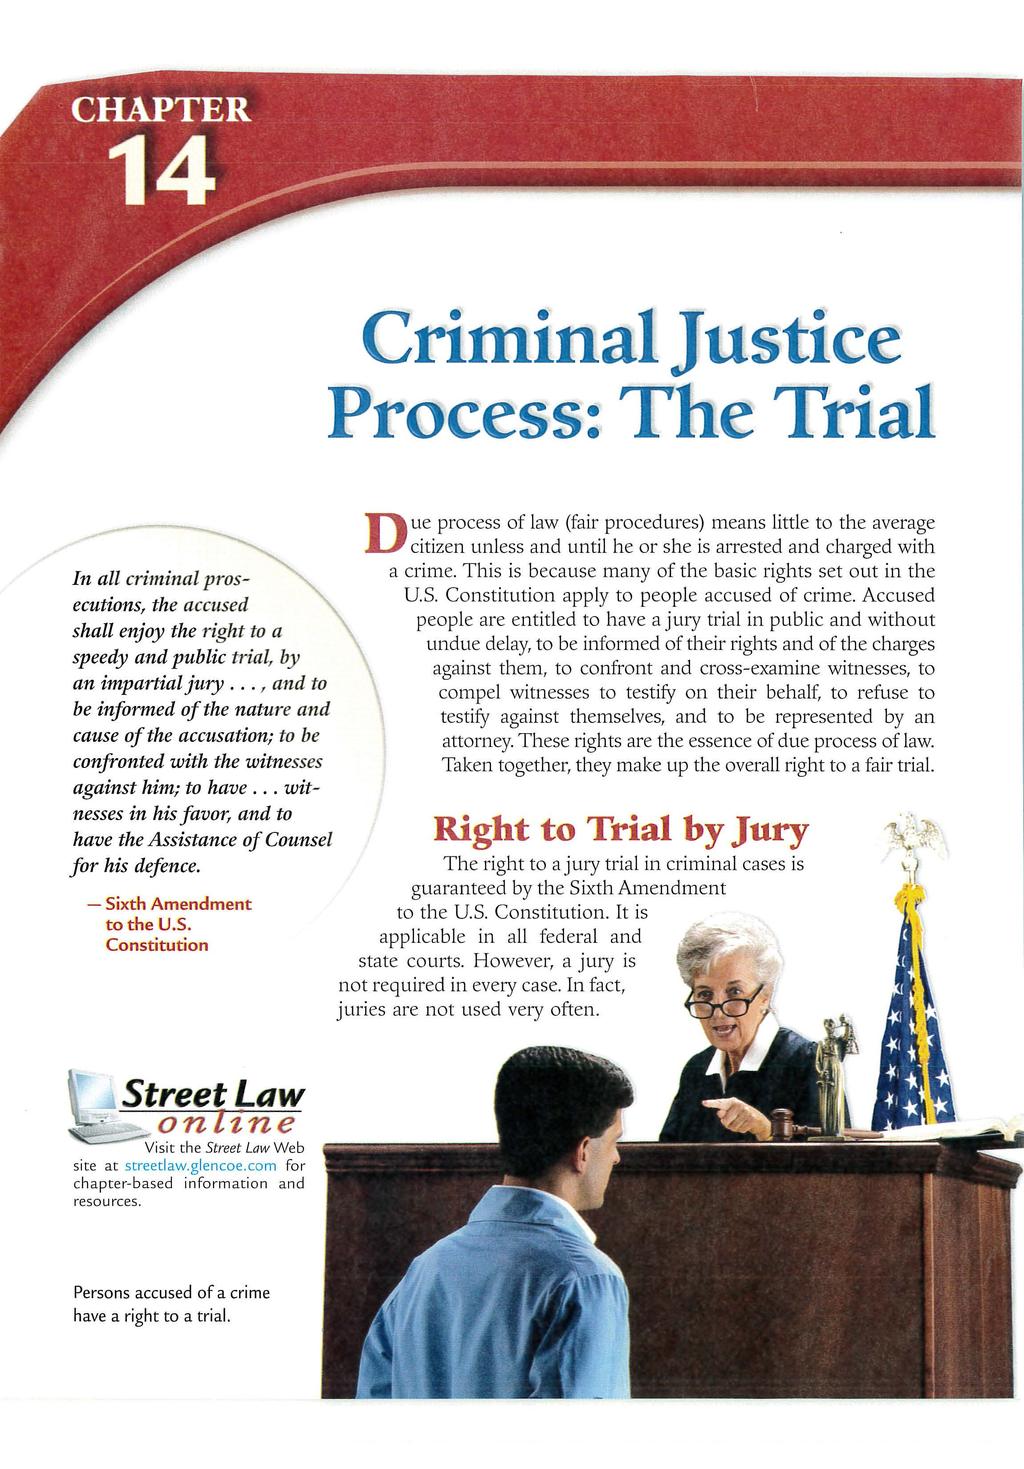 In all criminal prosecutions, the accused shall enjoy the right to a speedy and public trial, by an impartial jury.